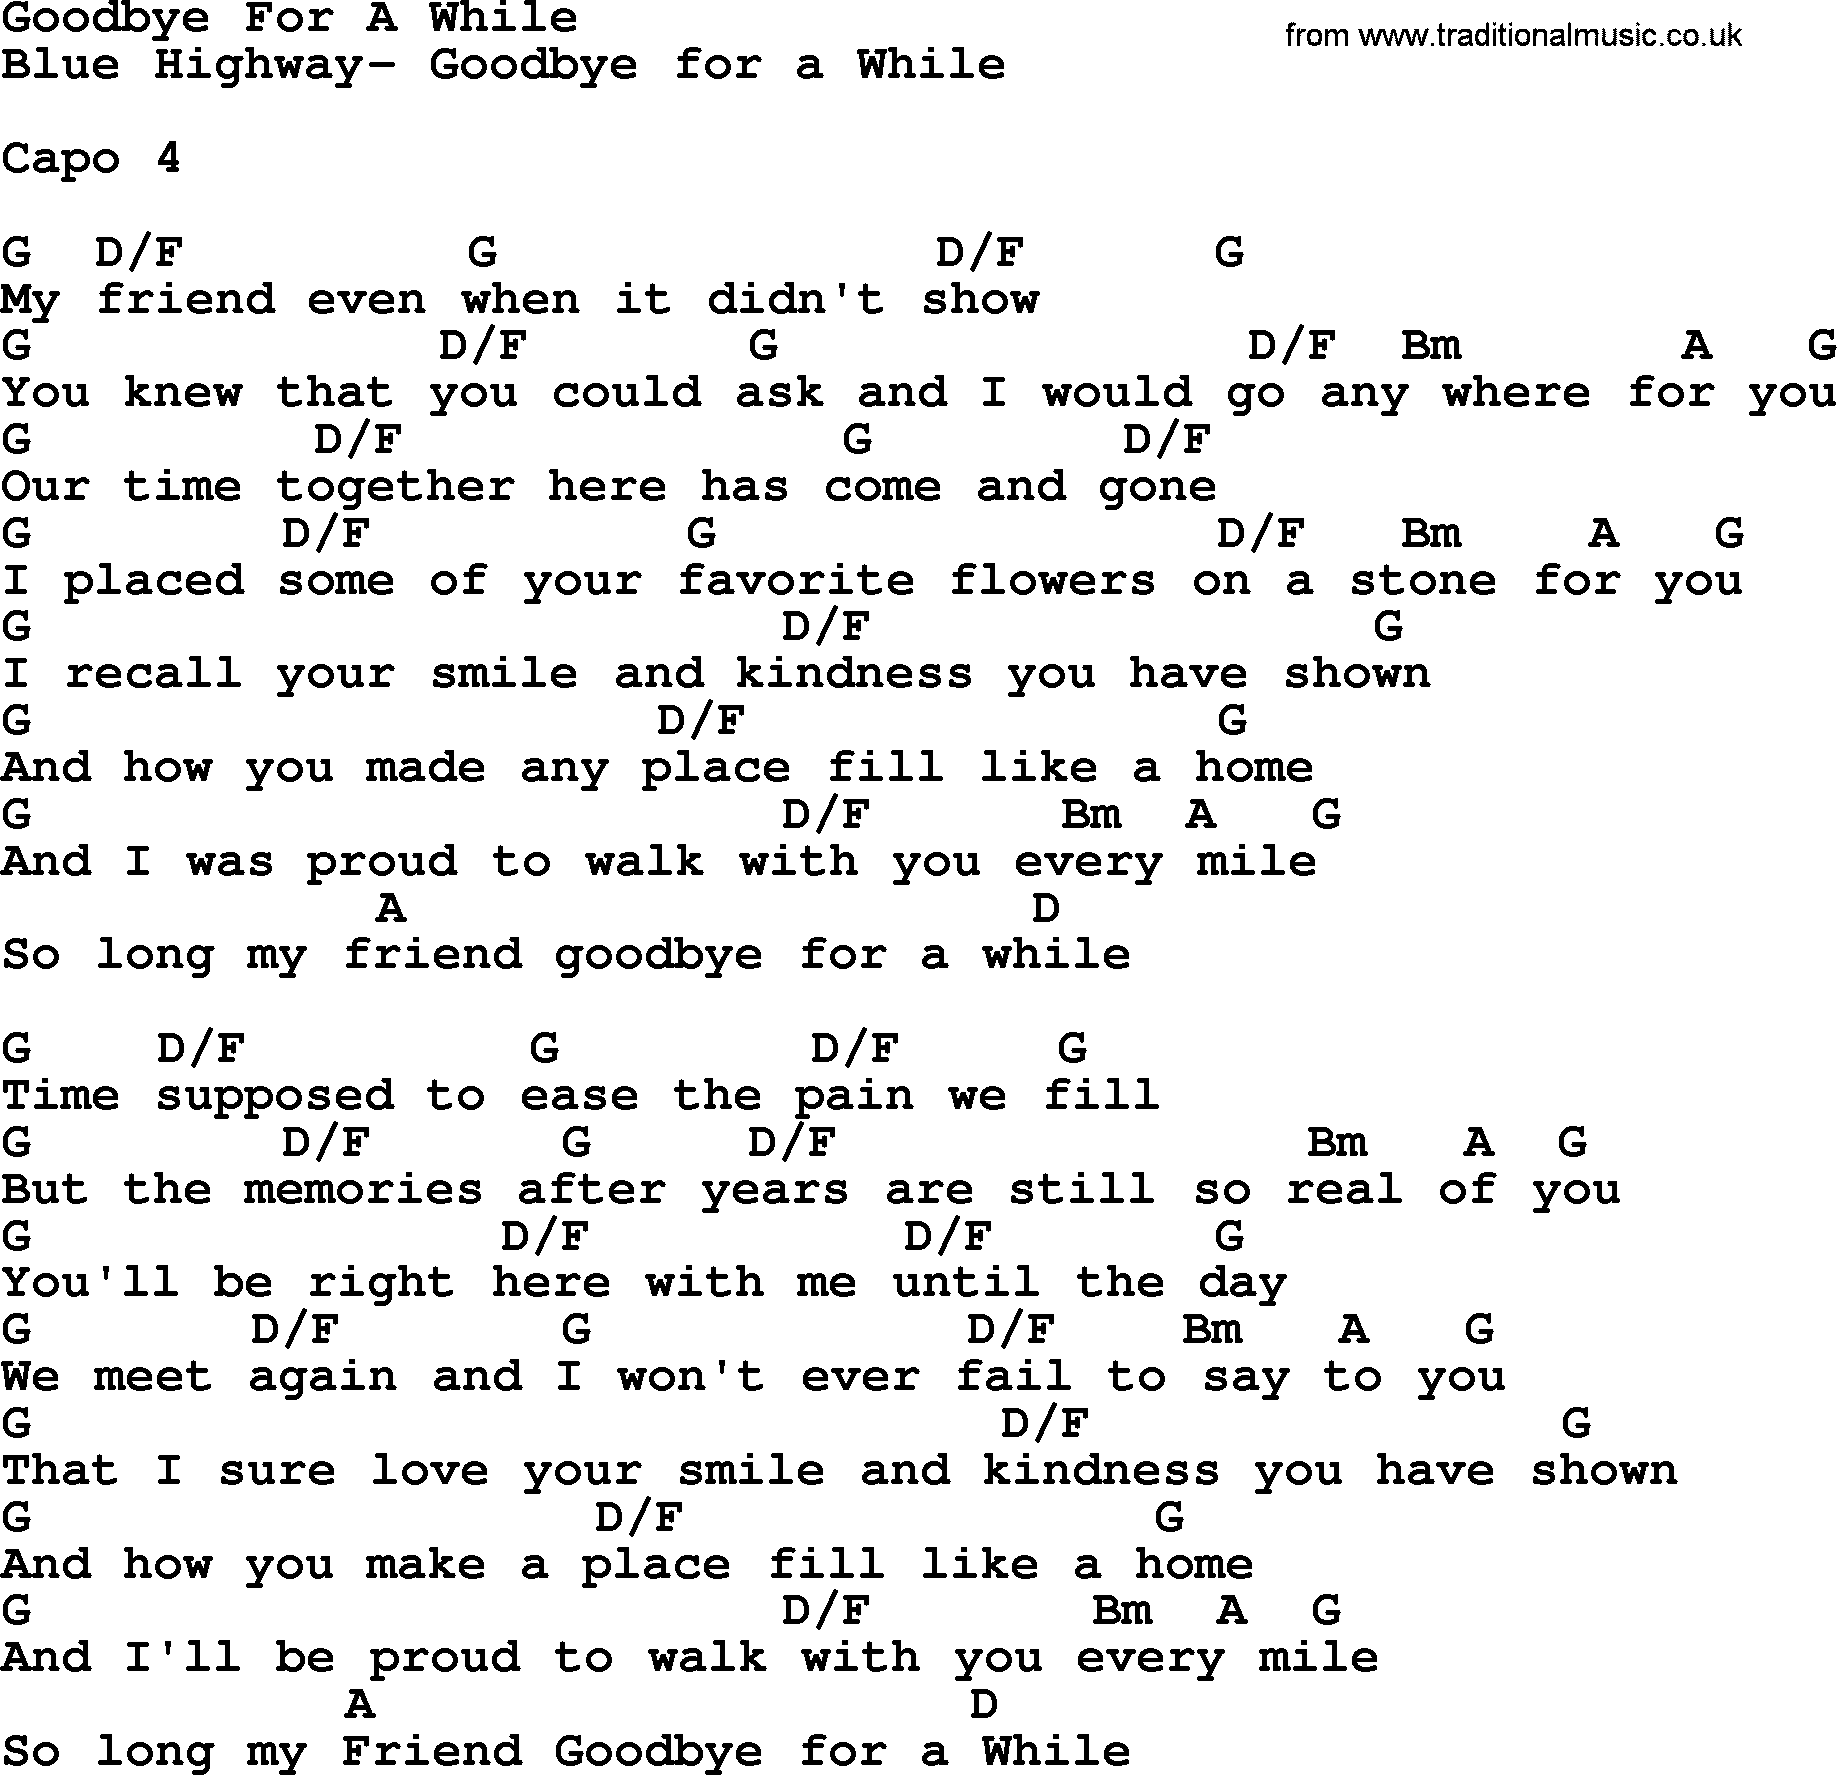 Bluegrass song: Goodbye For A While, lyrics and chords